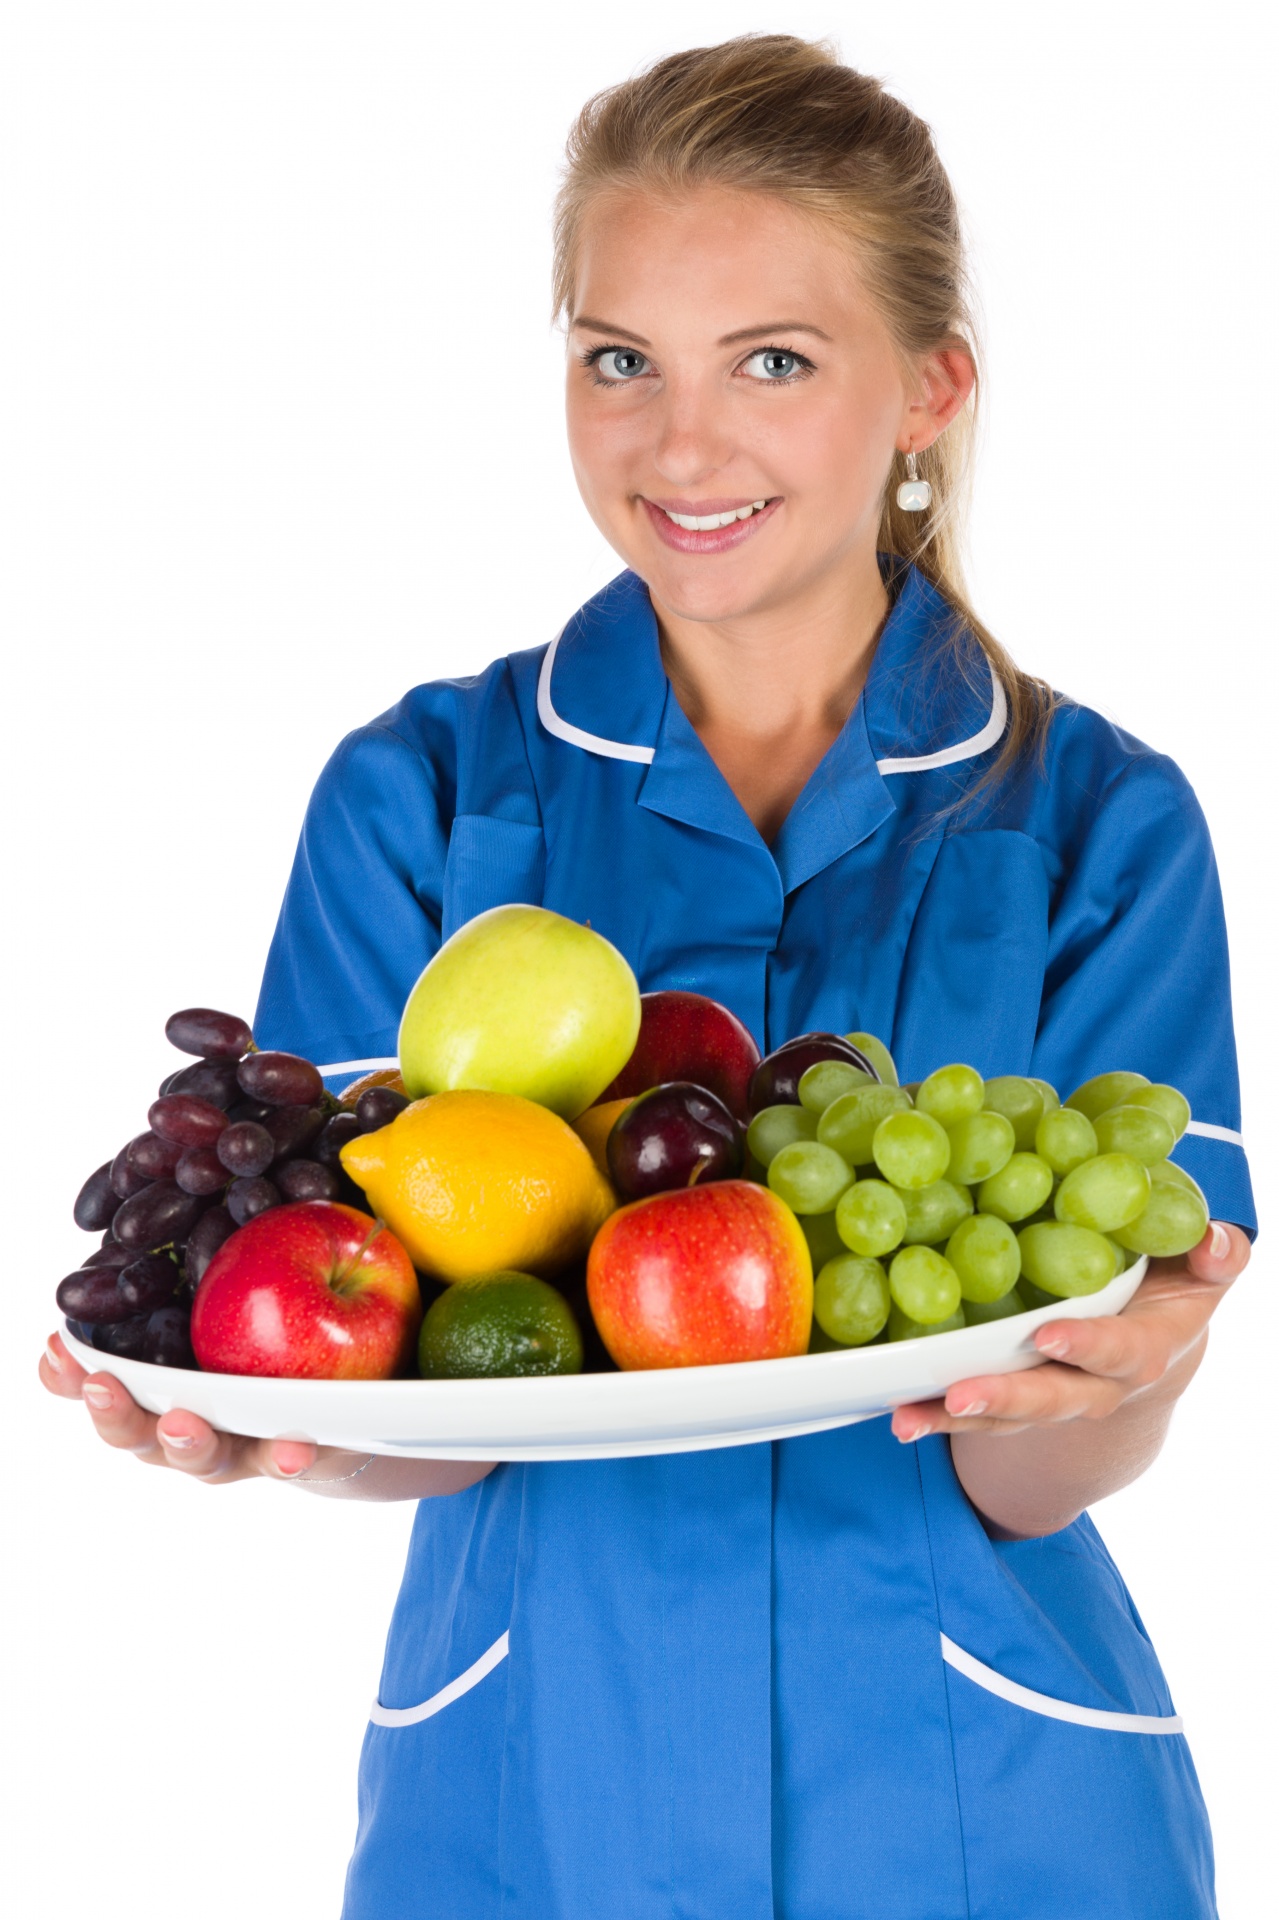 Nurse And A Bowl Of Fruit